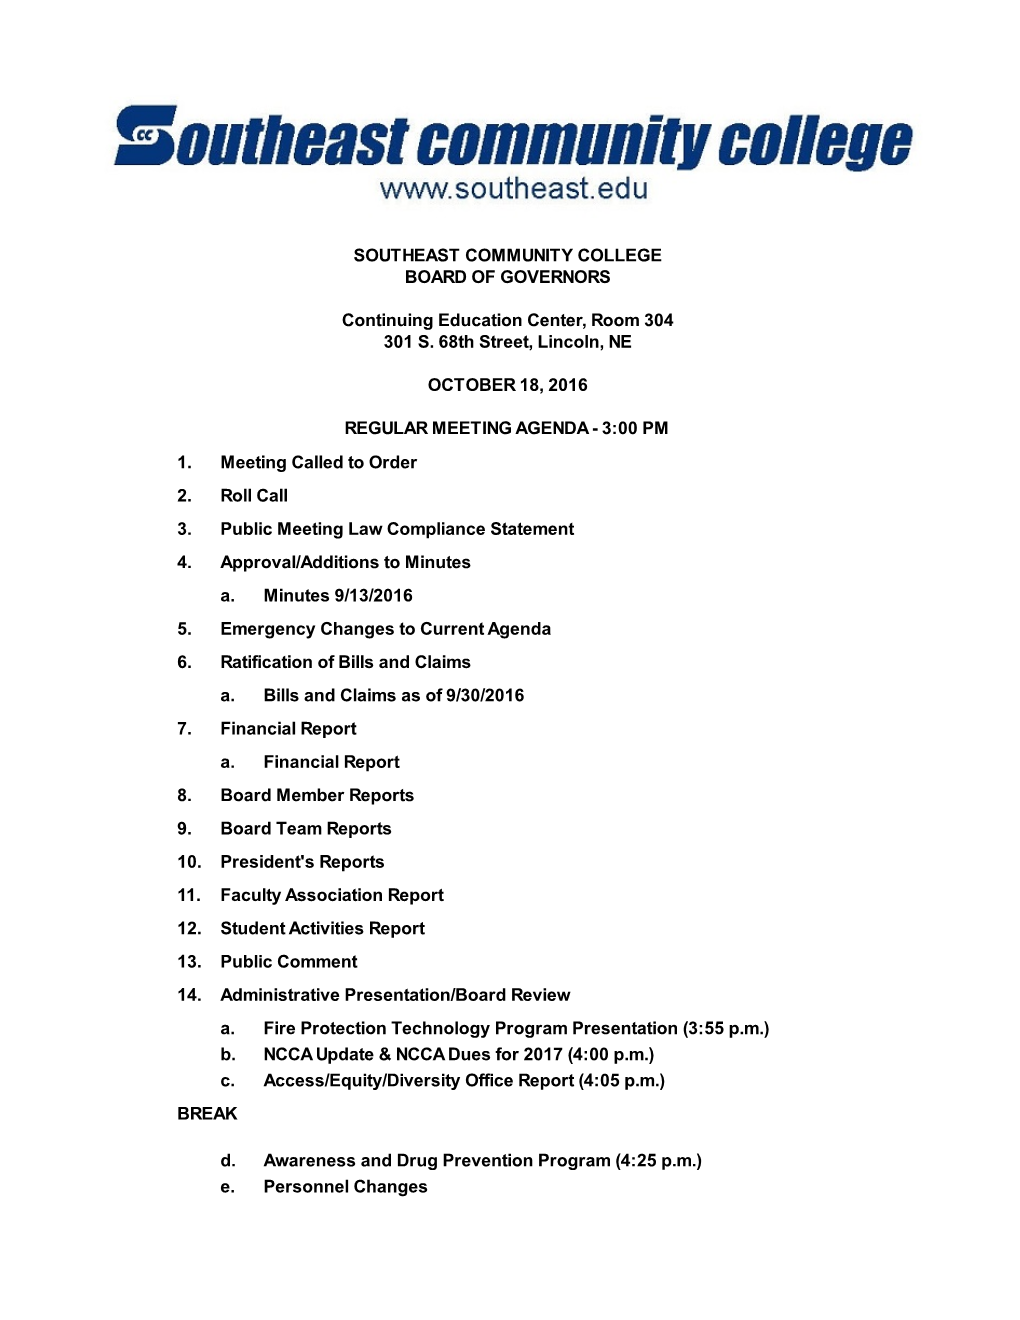 Southeast Community College Board of Governors